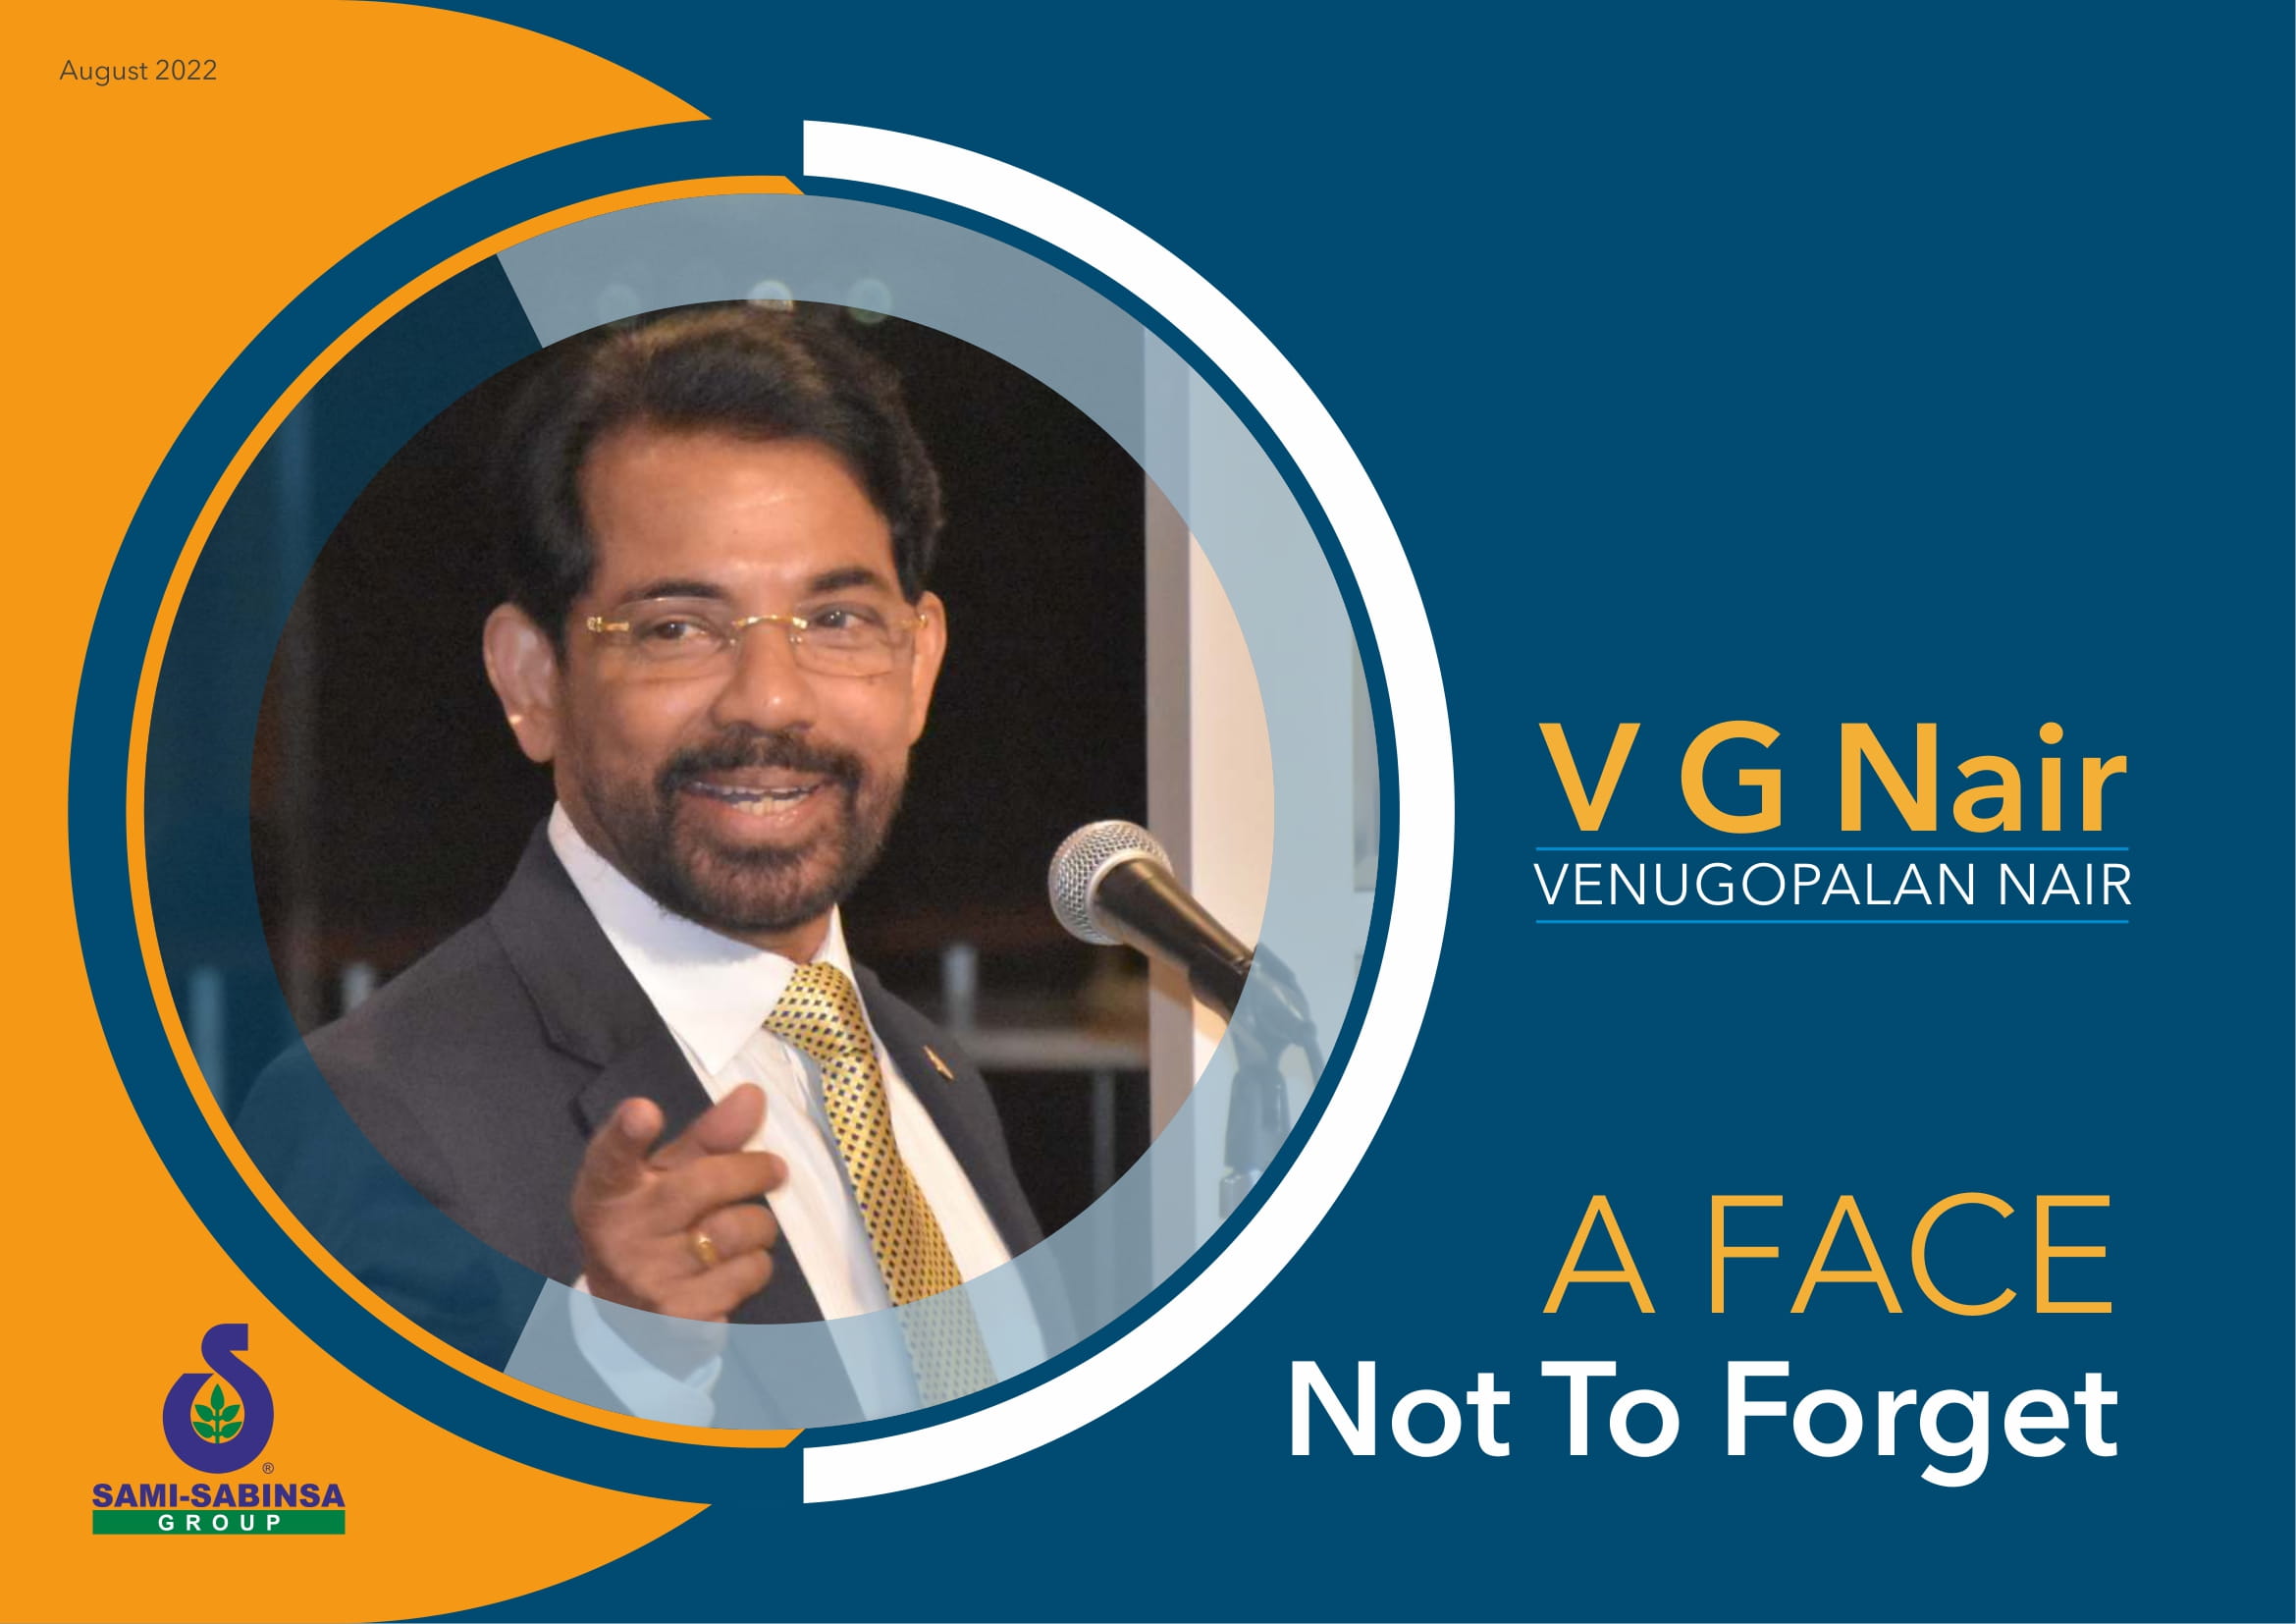 V G Nair - A Face Not To Forget